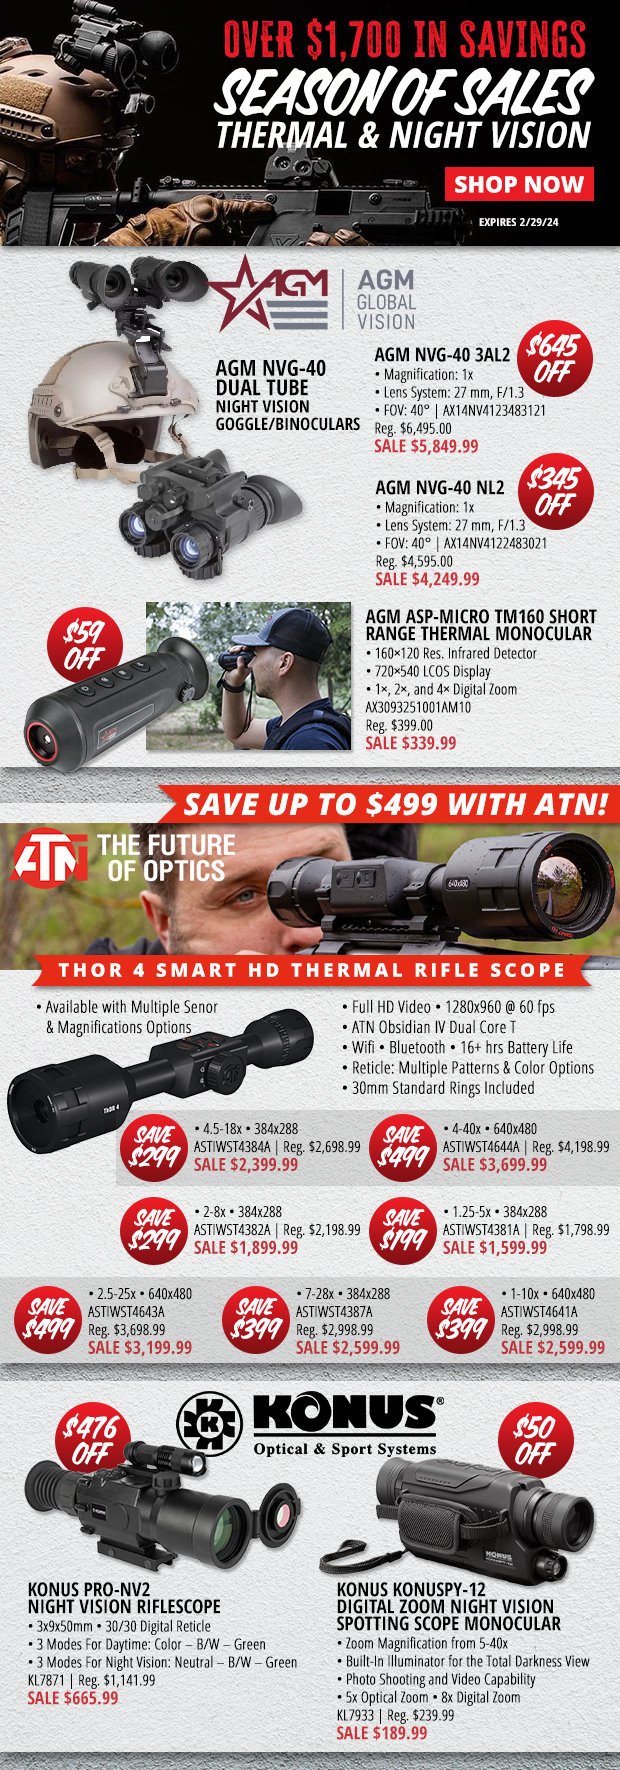 Over $1,700 in Savings on Select Thermal and Night Vision